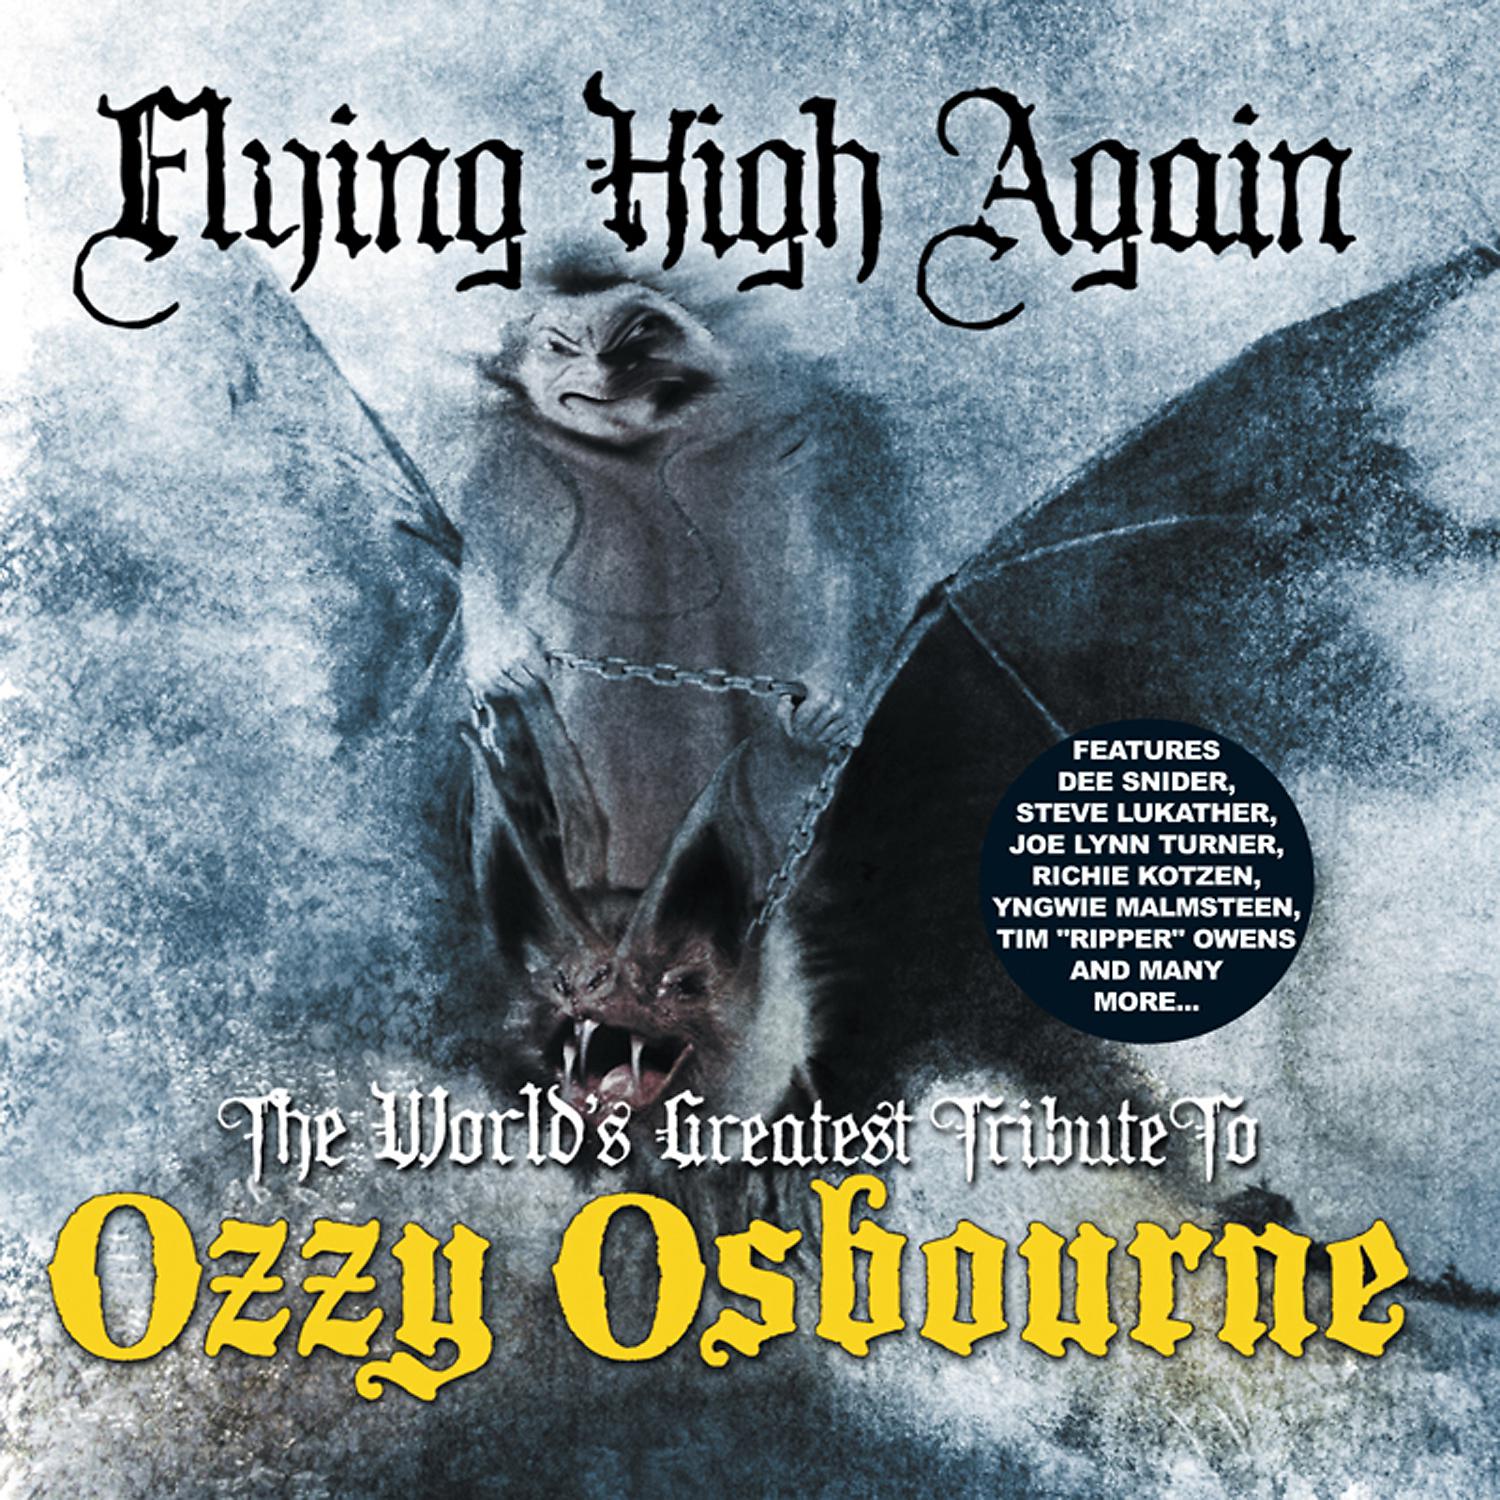 Постер альбома Flying High Again: The World's Greatest Tribute To Ozzy Osbourne